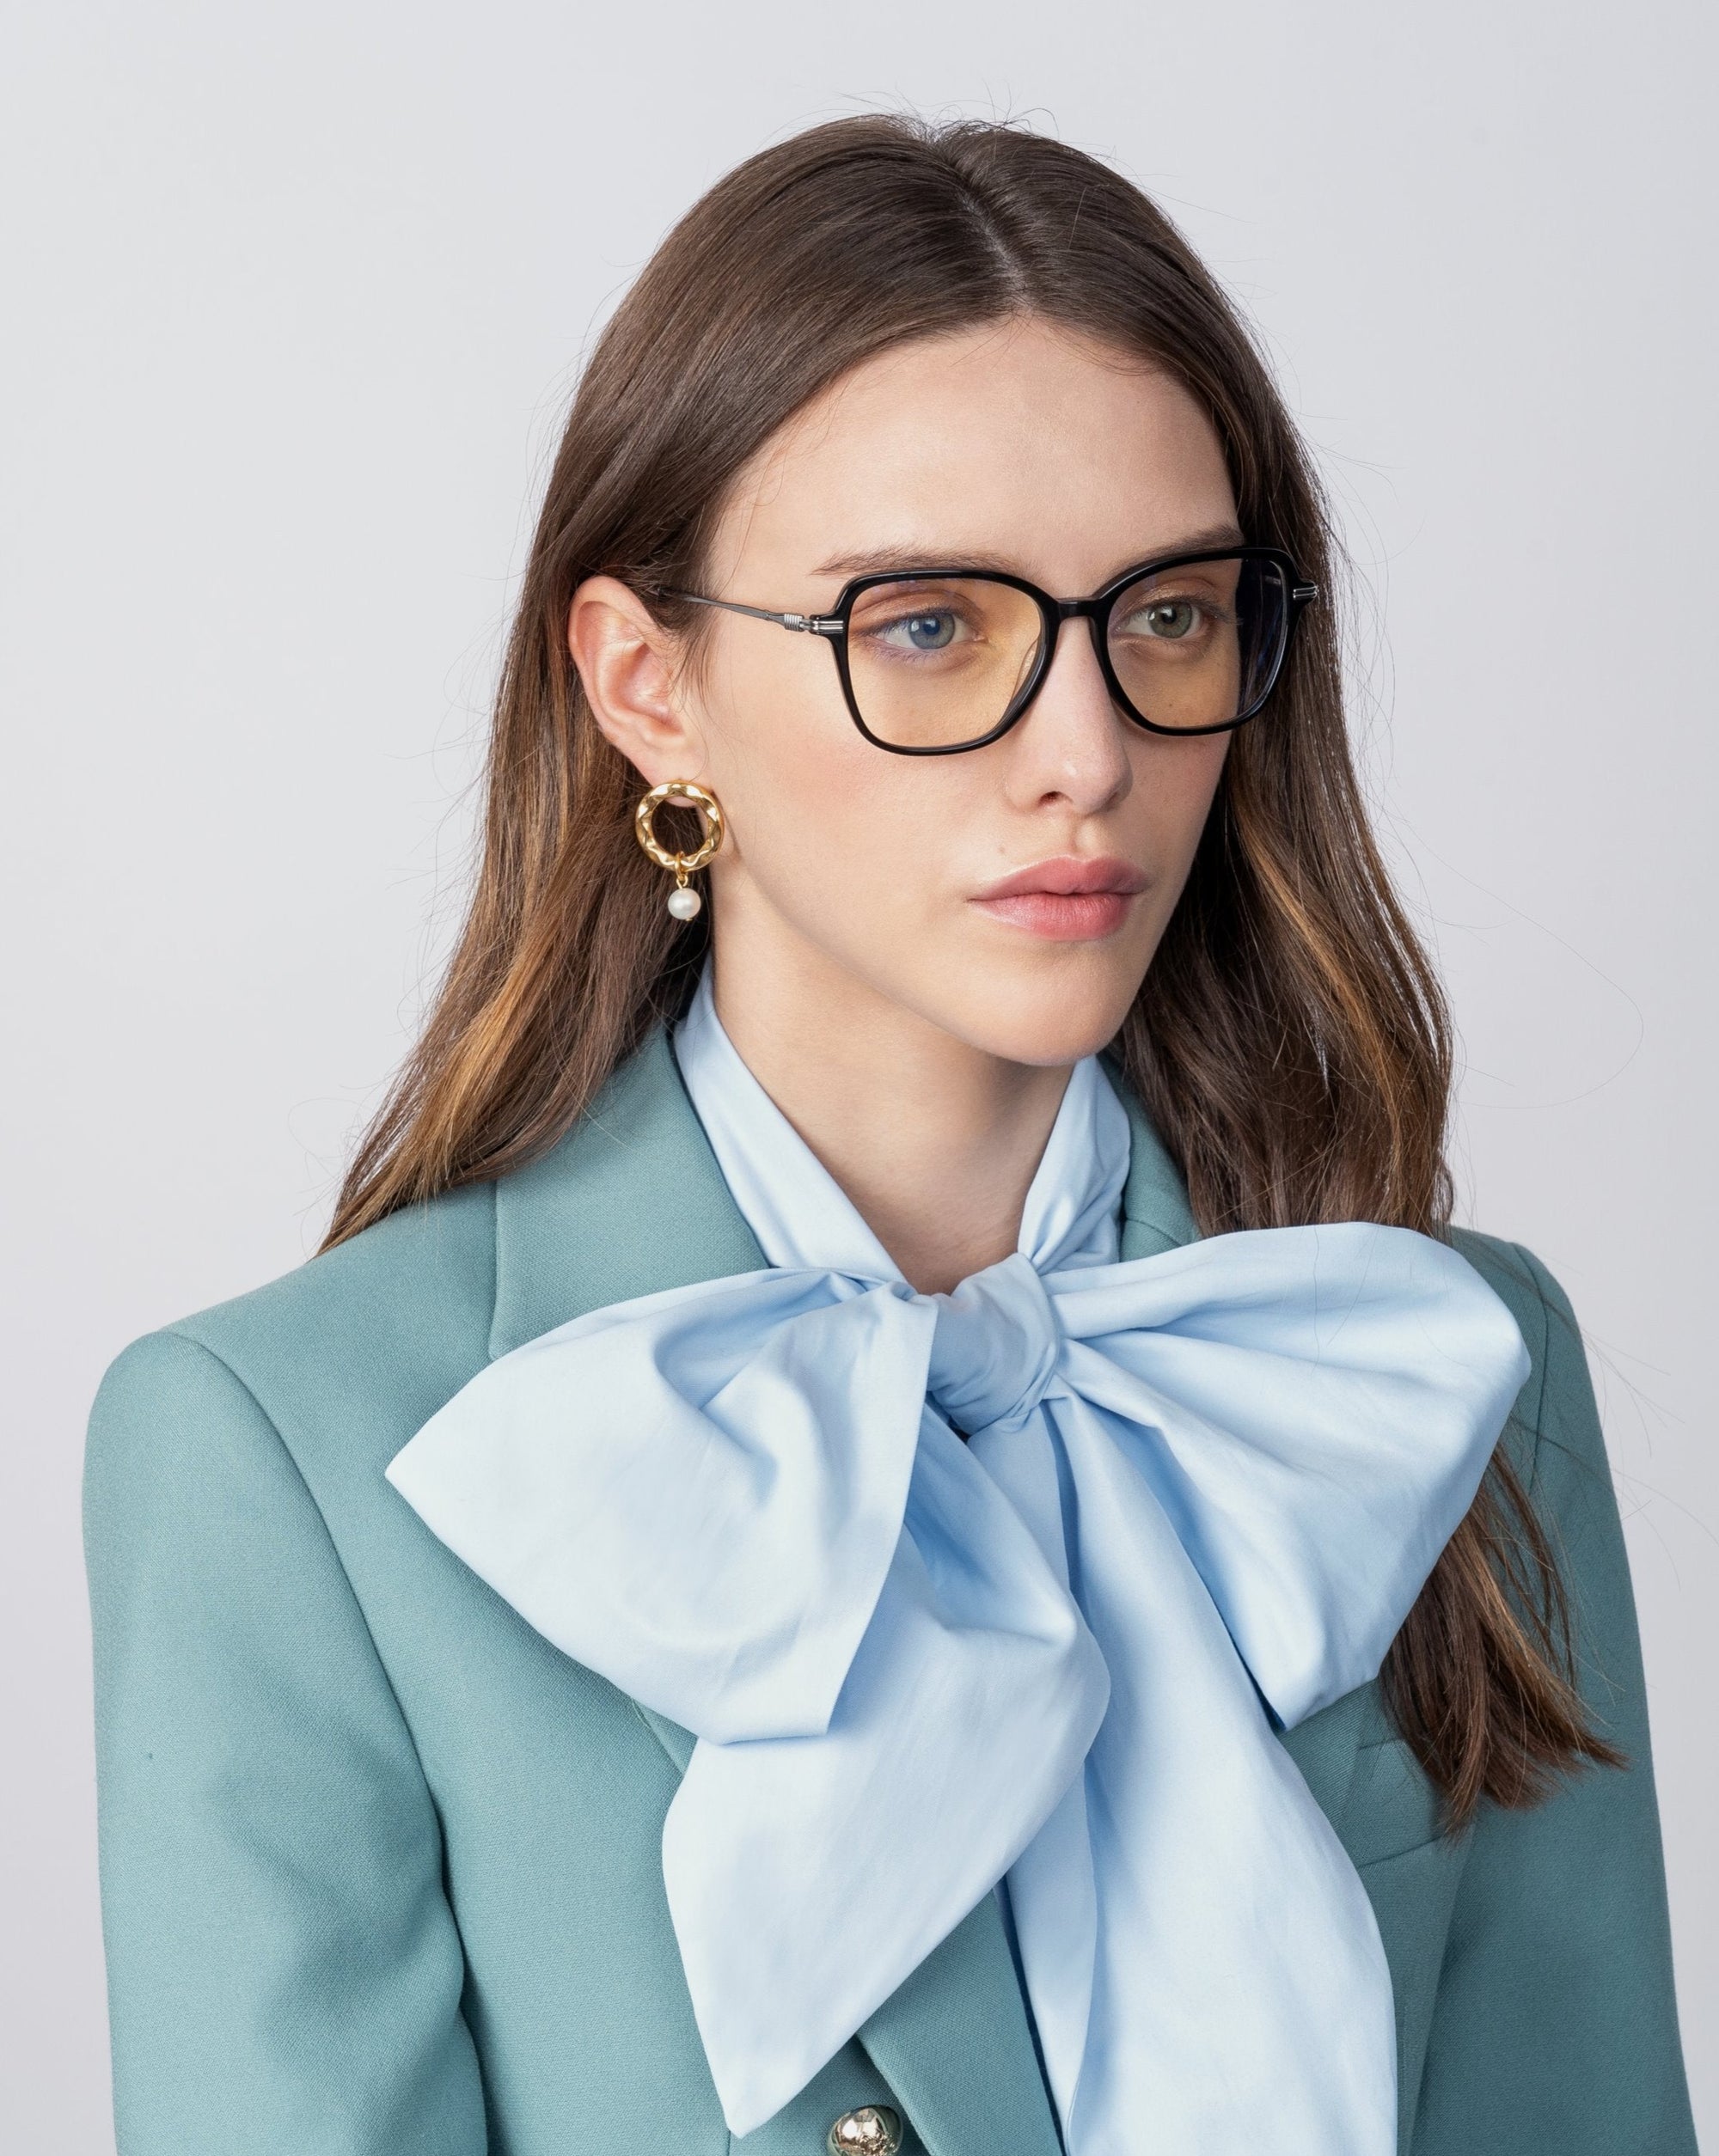 A person with long brown hair is wearing For Art&#39;s Sake® Sonnet black framed glasses with blue light filters, gold hoop earrings, and a light blue blouse with a large matching bow at the neck. They are also dressed in a teal blazer with a serious expression, looking slightly to the side.